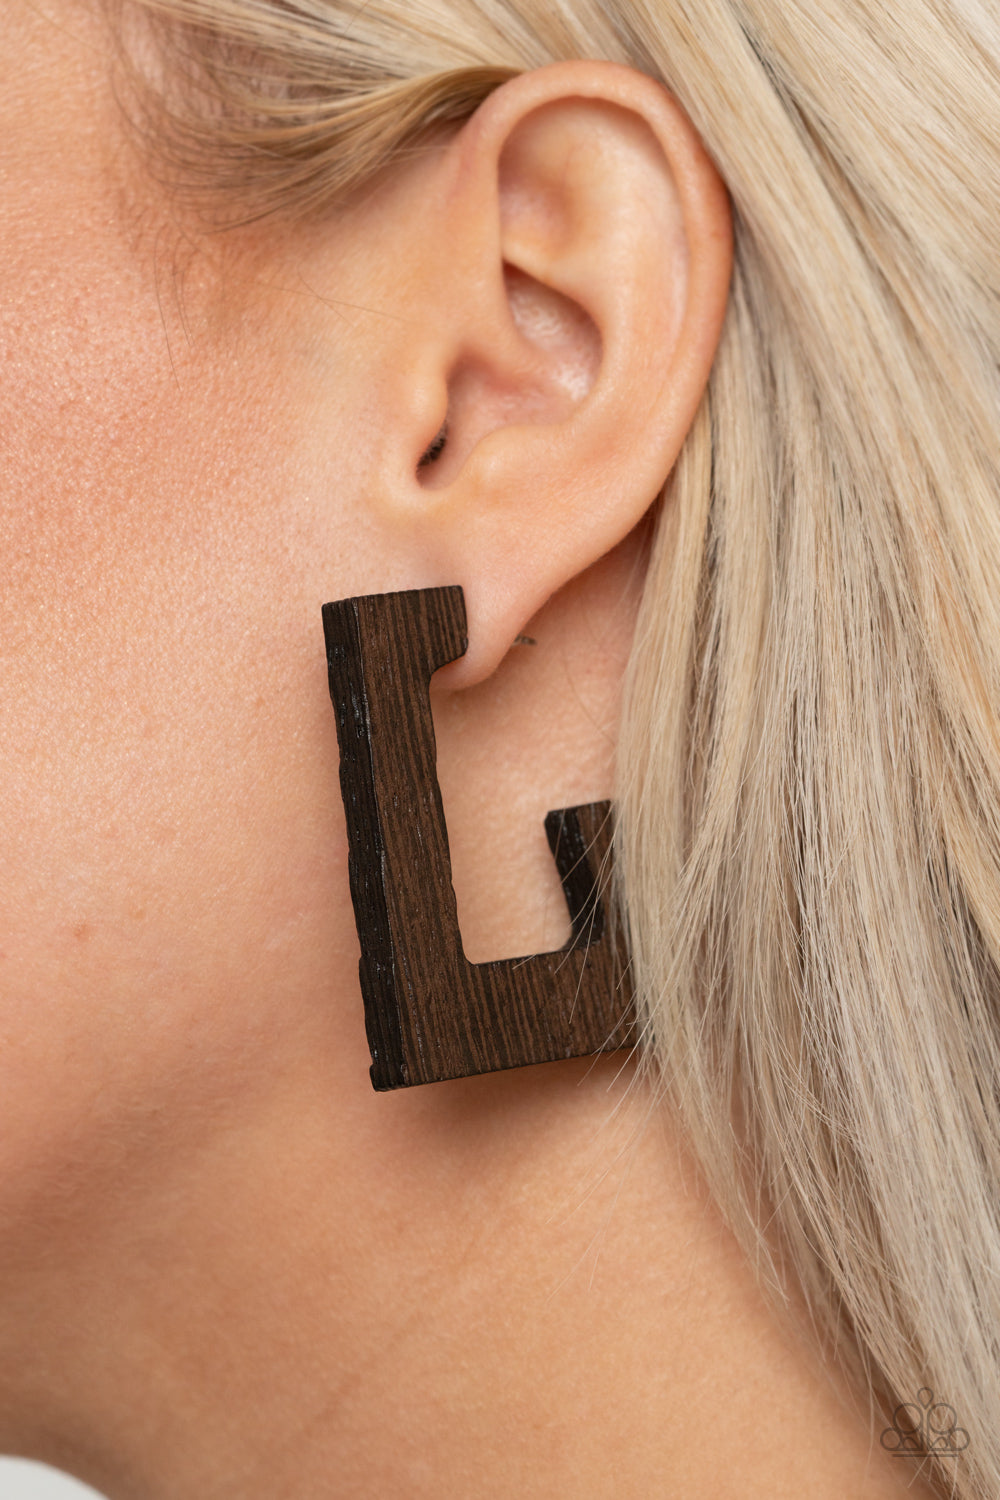 Paparazzi Accessories The Girl Next OUTDOOR - Brown Wood Earrings - Lady T Accessories